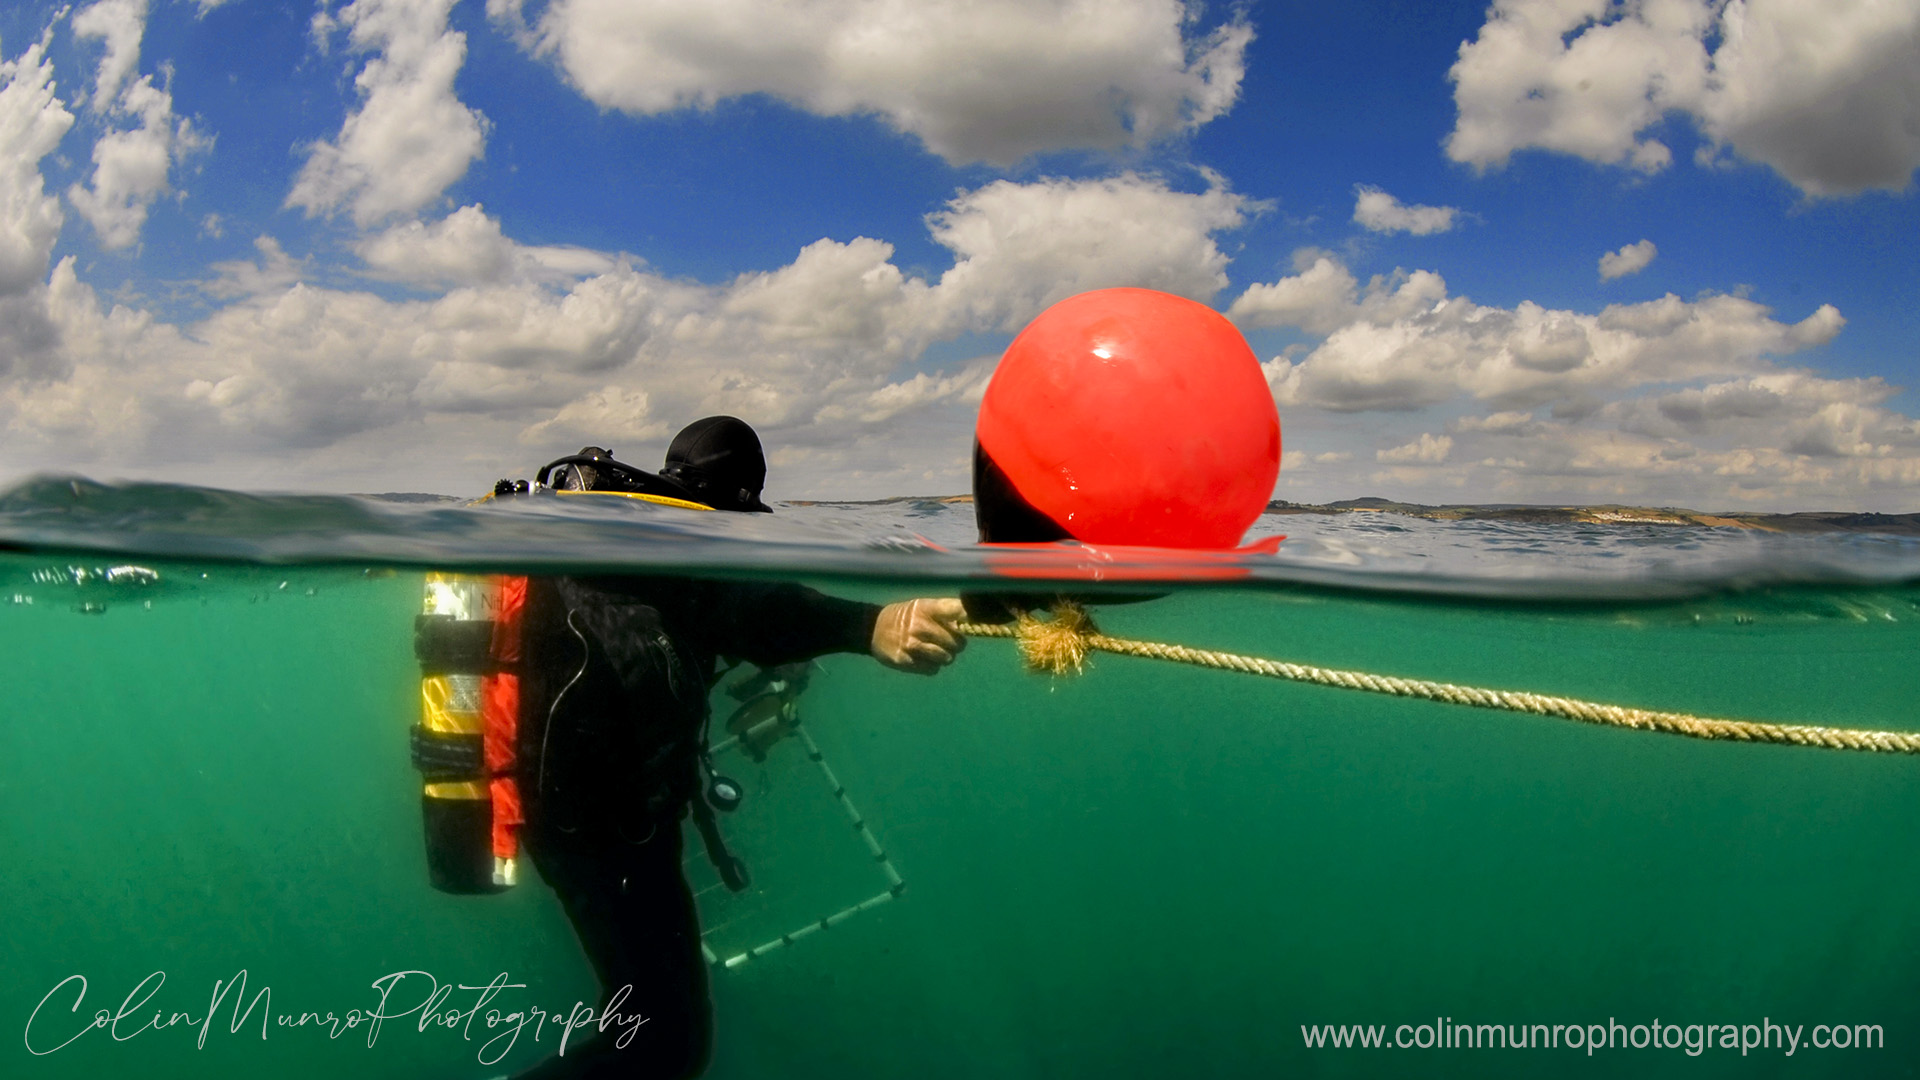 A scientific diver hangs on to a buoy line at the end of a dive. Lyme bay, English Channel. A half and half split shot, over under, by Colin Munro Photography